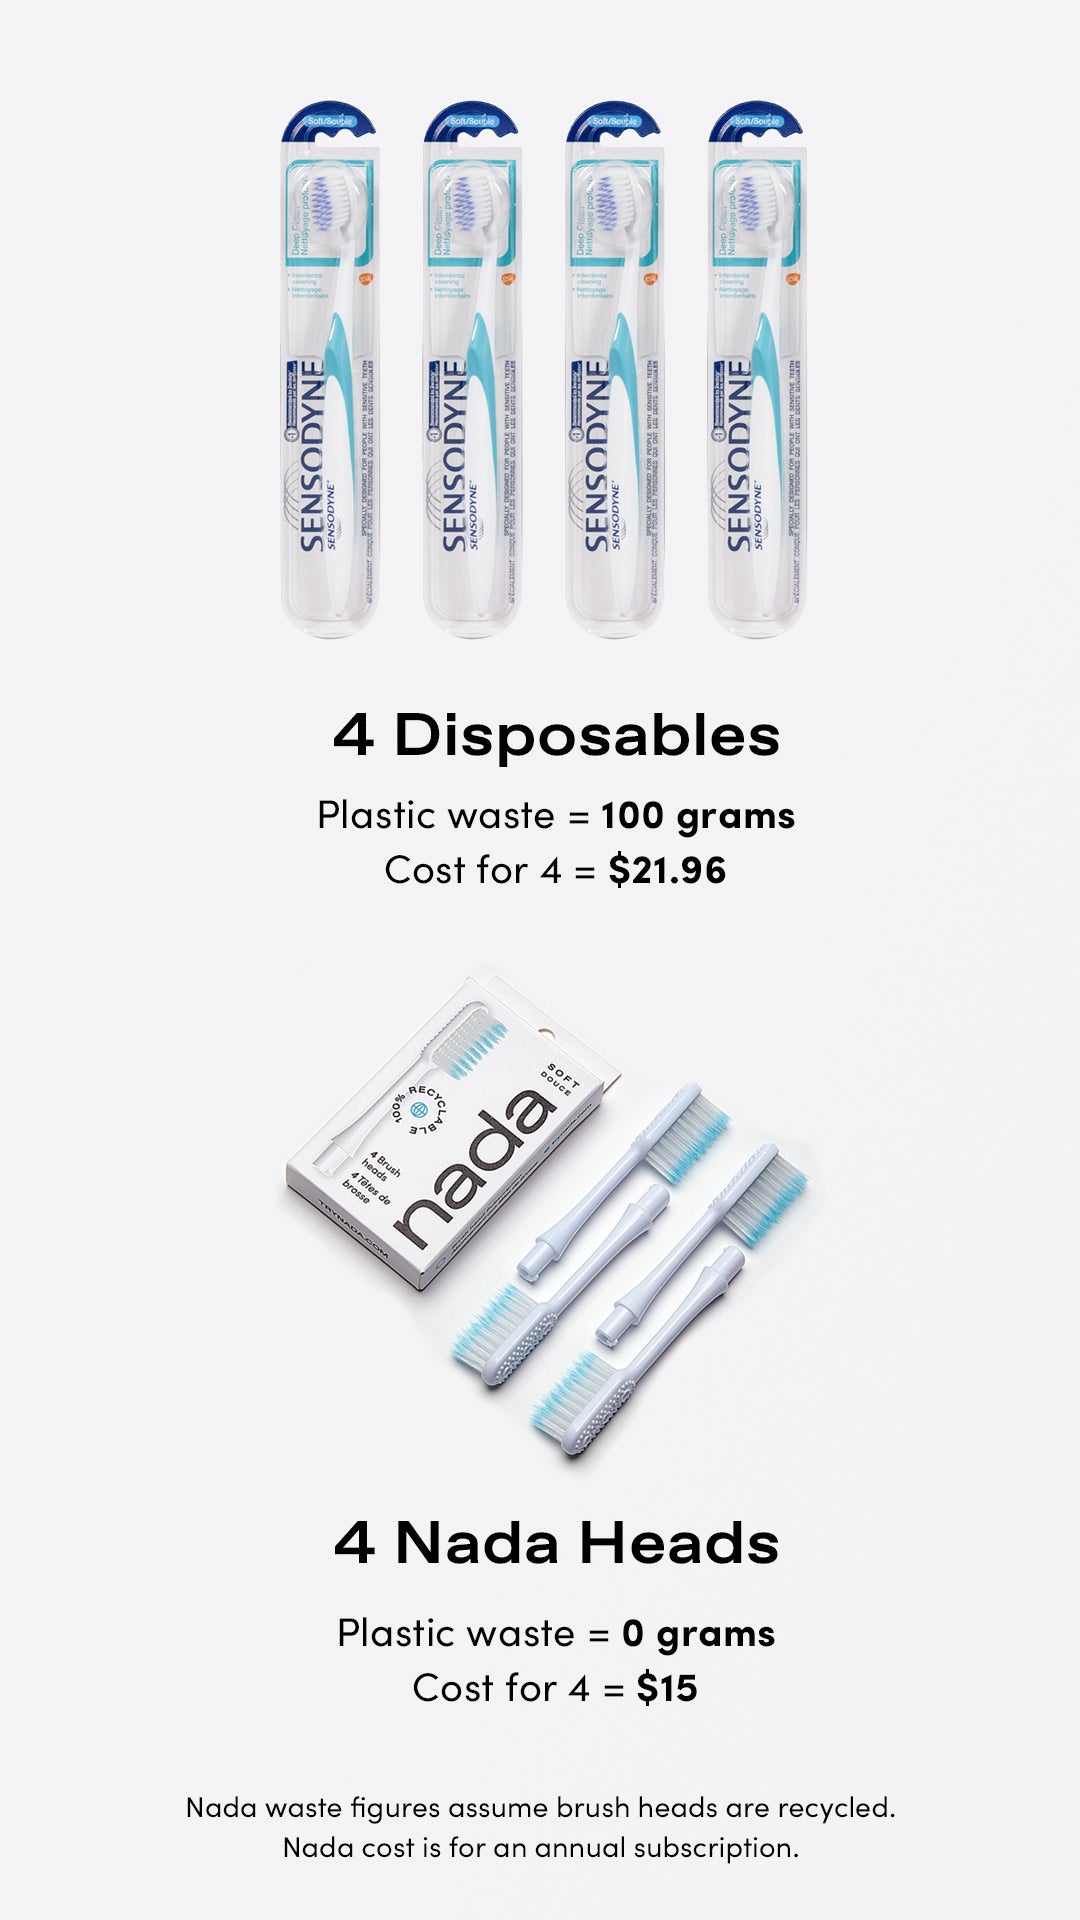 Comparing Nada sustainable toothbrush plastic waste and cost with disposable